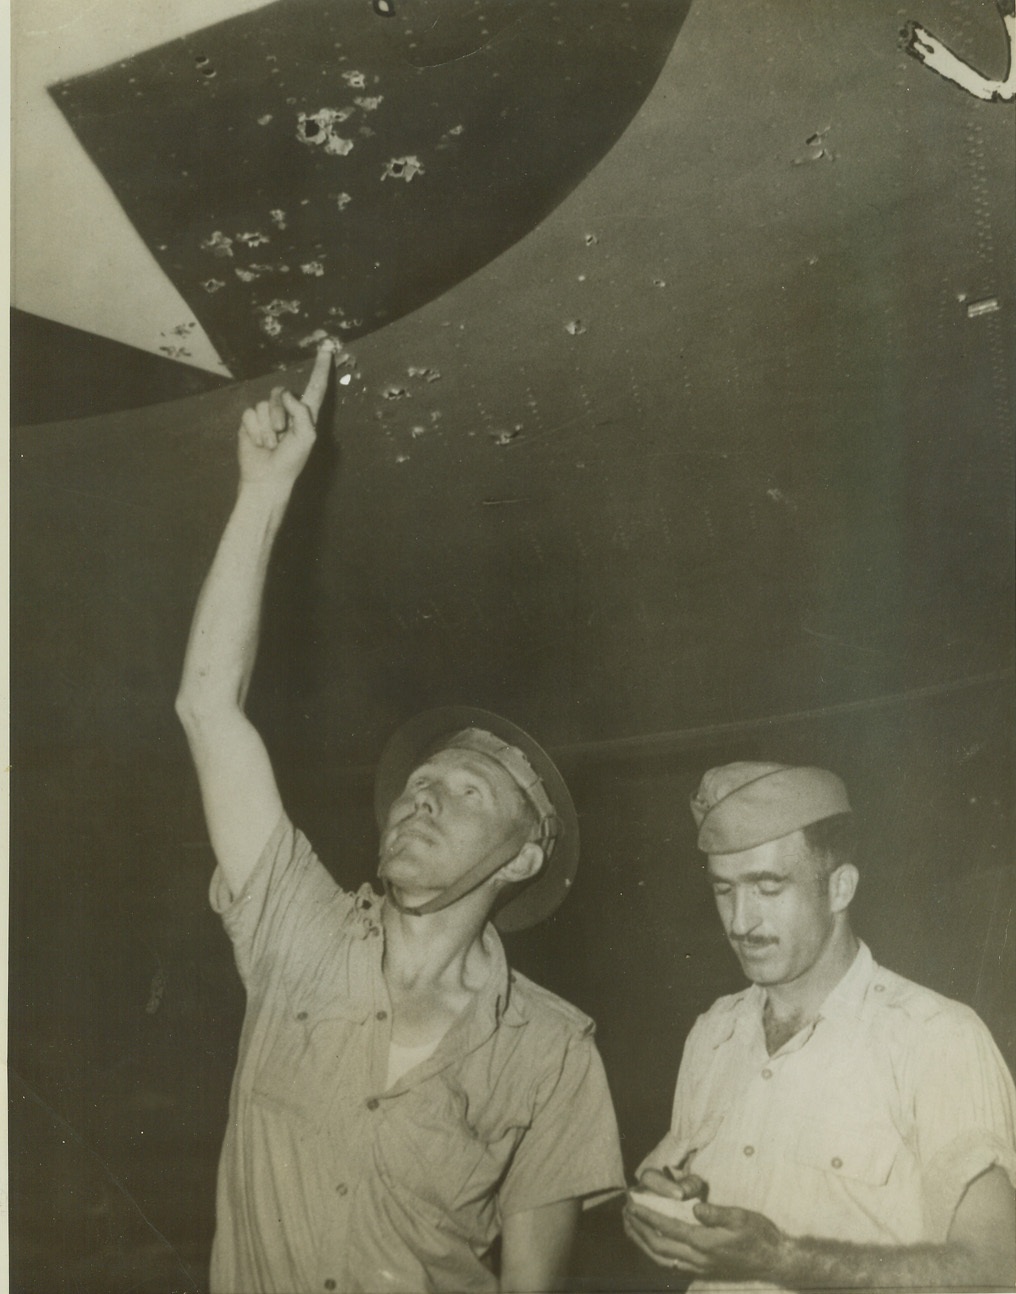 U.S. FLIERS WHO AID “AUSSIES” INSPECT DAMAGE TO THEIR SHIP, 3/9/1942. In one of the first pictures from Australia since the United States entered World War II, two U.S. Army “Flying Fortress” crew members examine the wing of their ship which was struck “a few times” by Jap bullets during a tiff with the invaders in the South Pacific. Now in Australia to bolster the Allied Forces, this was one of the “Flying Fortresses” to see action against the Japanese in the Philippine area. Credit: ACME;